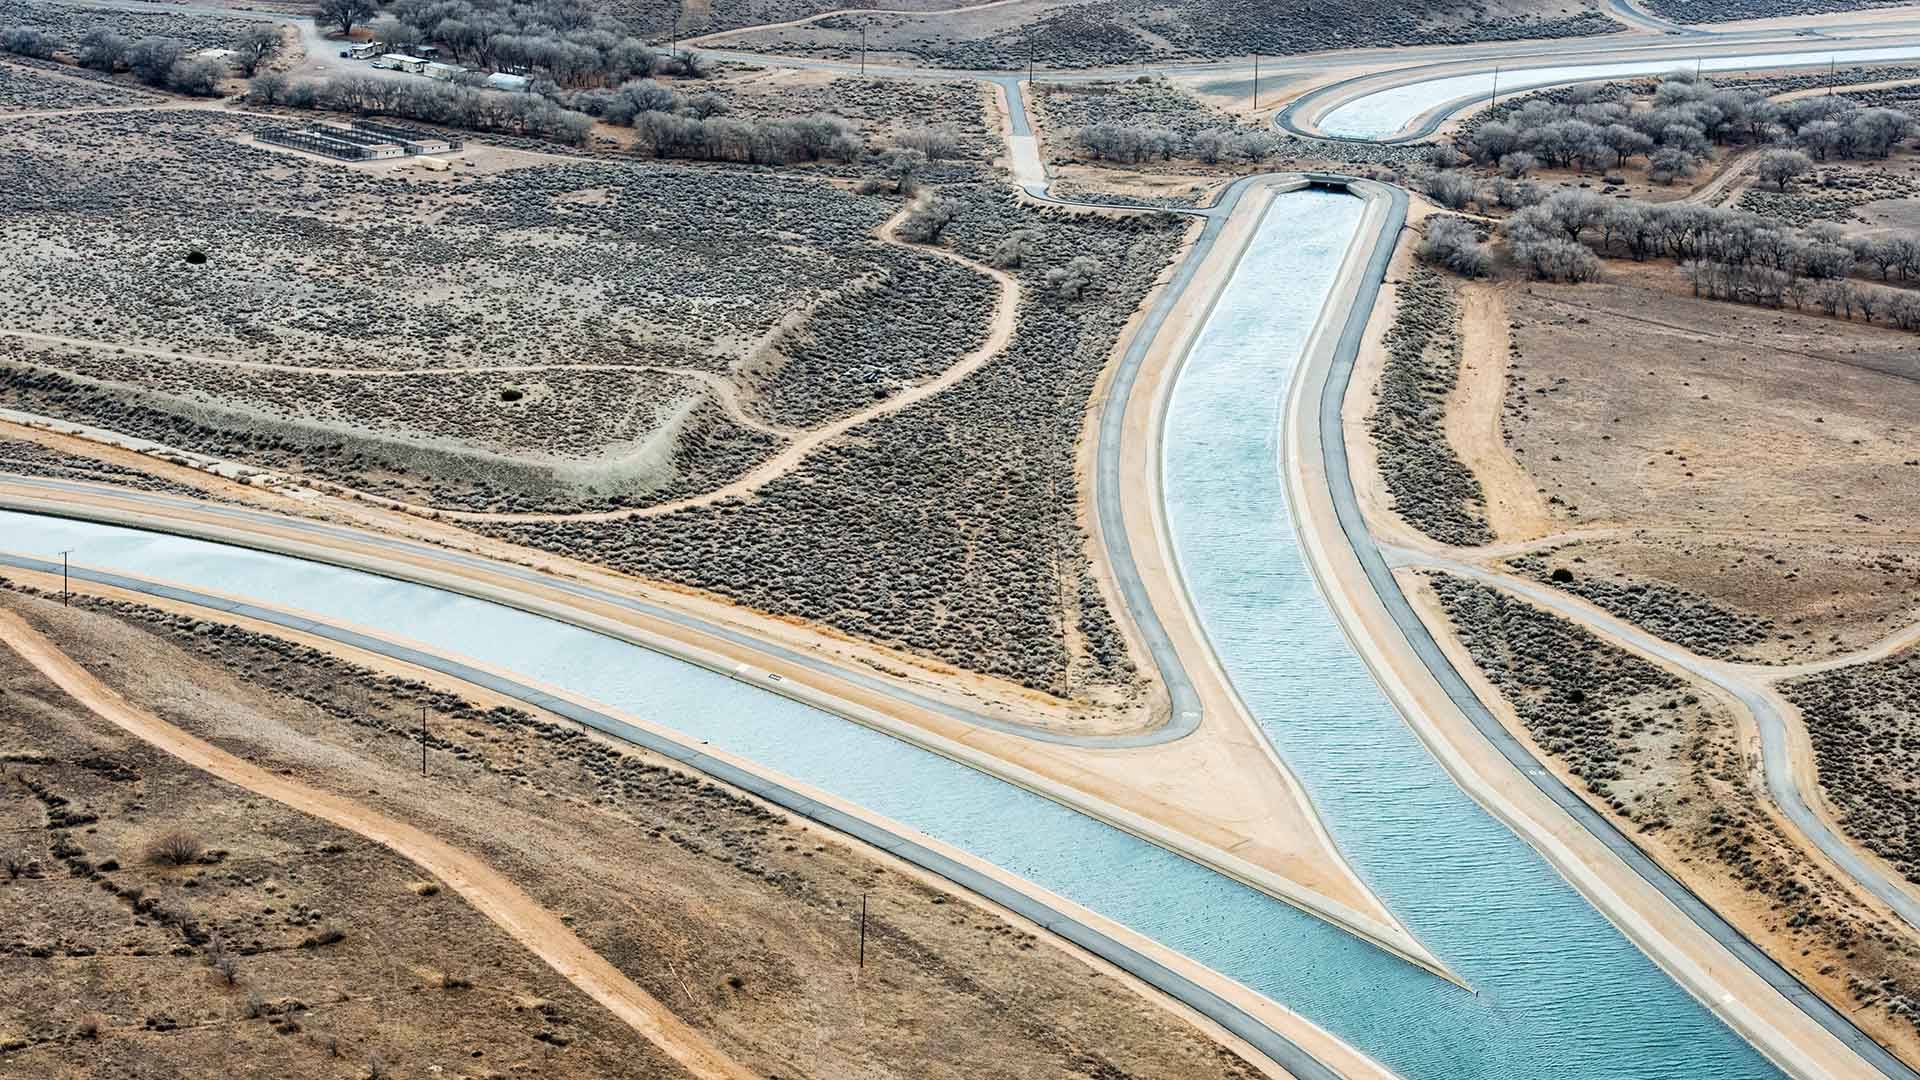 Under a presidential memo, federal biologists are under unprecedented time pressure to make key water decisions that control how much flows through the California Aqueduct. Florence Low / California Department of Water Resources